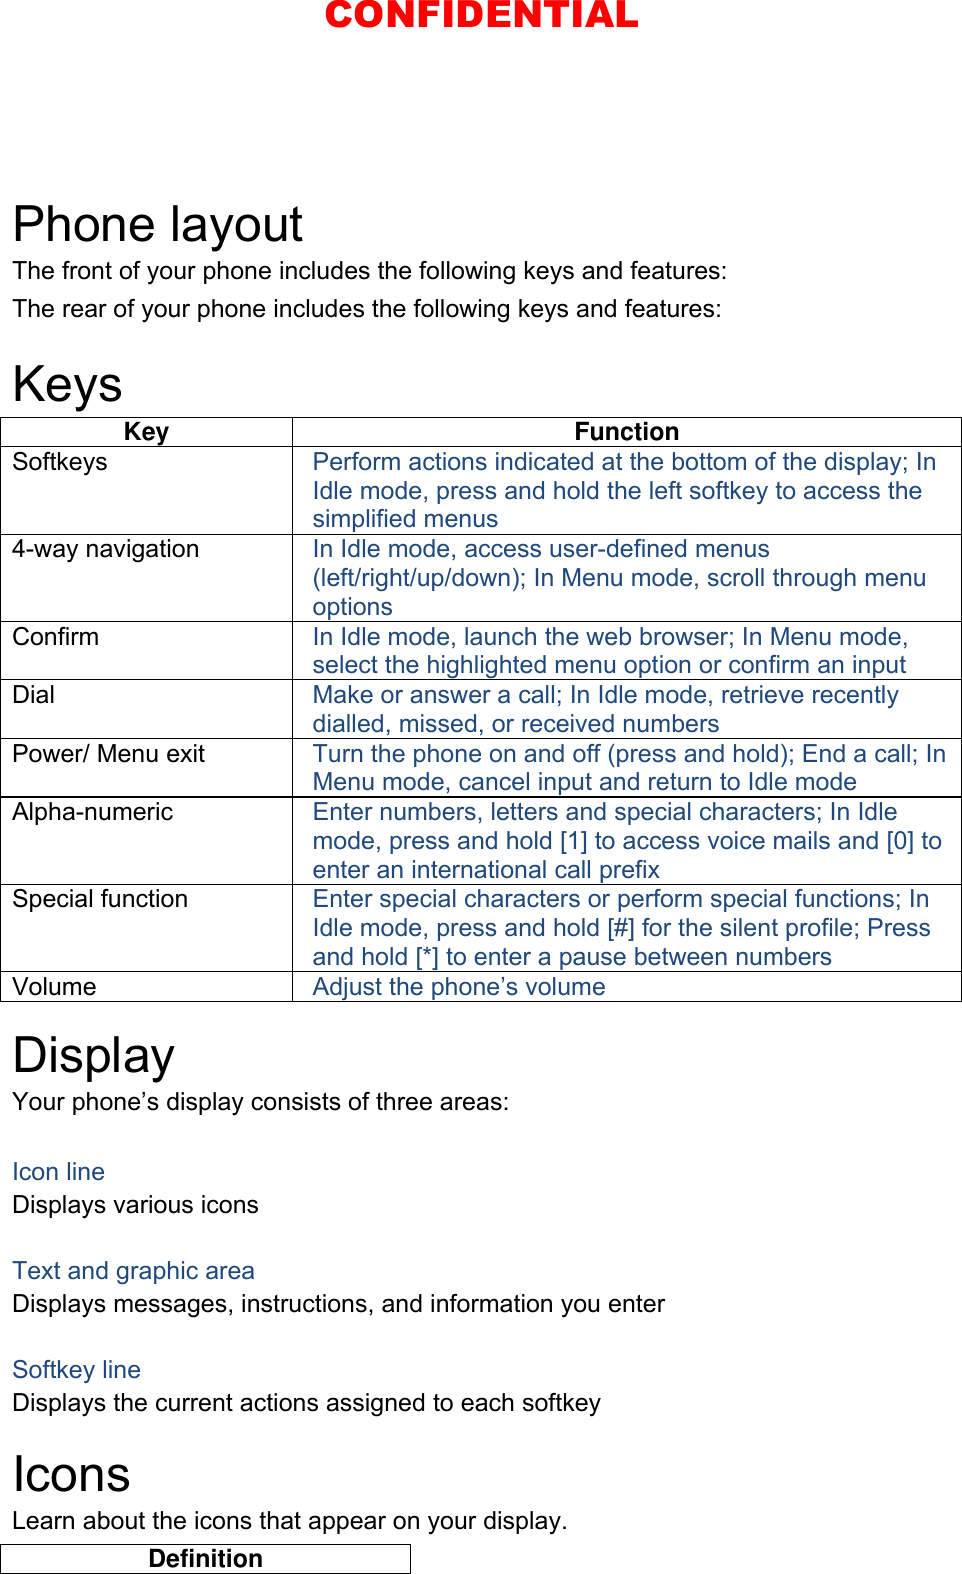  Phone layout The front of your phone includes the following keys and features: The rear of your phone includes the following keys and features:  Keys Key Function Softkeys  Perform actions indicated at the bottom of the display; In Idle mode, press and hold the left softkey to access the simplified menus 4-way navigation  In Idle mode, access user-defined menus (left/right/up/down); In Menu mode, scroll through menu options Confirm  In Idle mode, launch the web browser; In Menu mode, select the highlighted menu option or confirm an input Dial  Make or answer a call; In Idle mode, retrieve recently dialled, missed, or received numbers Power/ Menu exit  Turn the phone on and off (press and hold); End a call; In Menu mode, cancel input and return to Idle mode Alpha-numeric  Enter numbers, letters and special characters; In Idle mode, press and hold [1] to access voice mails and [0] to enter an international call prefix Special function  Enter special characters or perform special functions; In Idle mode, press and hold [#] for the silent profile; Press and hold [*] to enter a pause between numbers Volume  Adjust the phone’s volume  Display Your phone’s display consists of three areas:  Icon line Displays various icons  Text and graphic area Displays messages, instructions, and information you enter  Softkey line Displays the current actions assigned to each softkey  Icons Learn about the icons that appear on your display. Definition CONFIDENTIAL